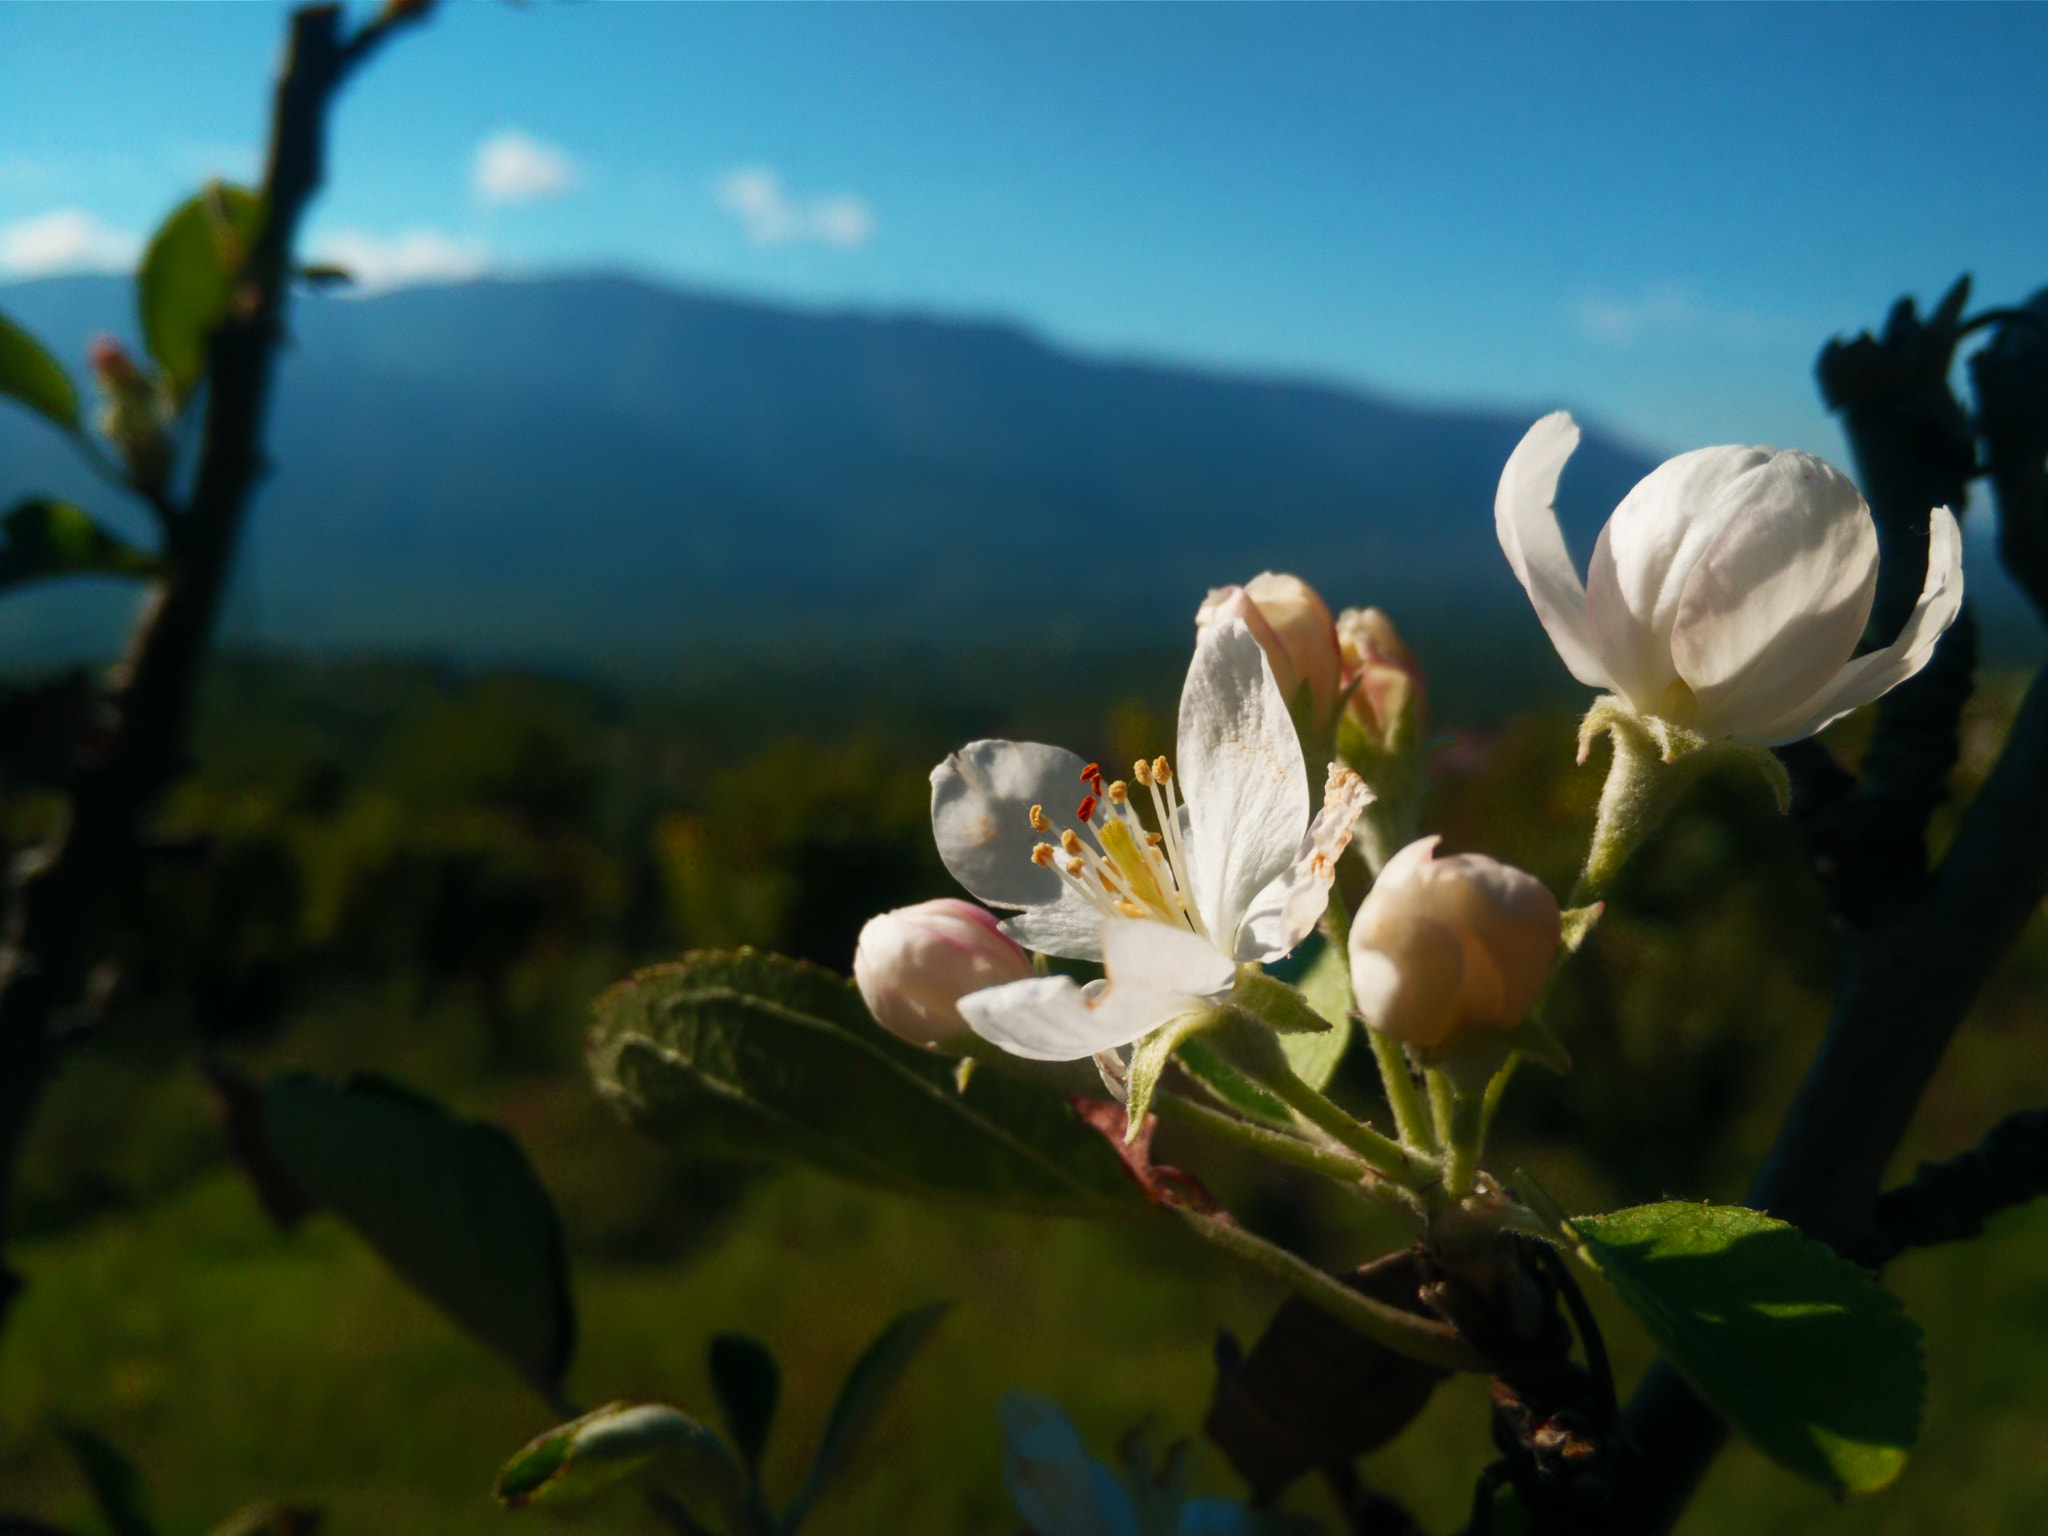 OPPO Find7 sample photo. Apple blossoms photography